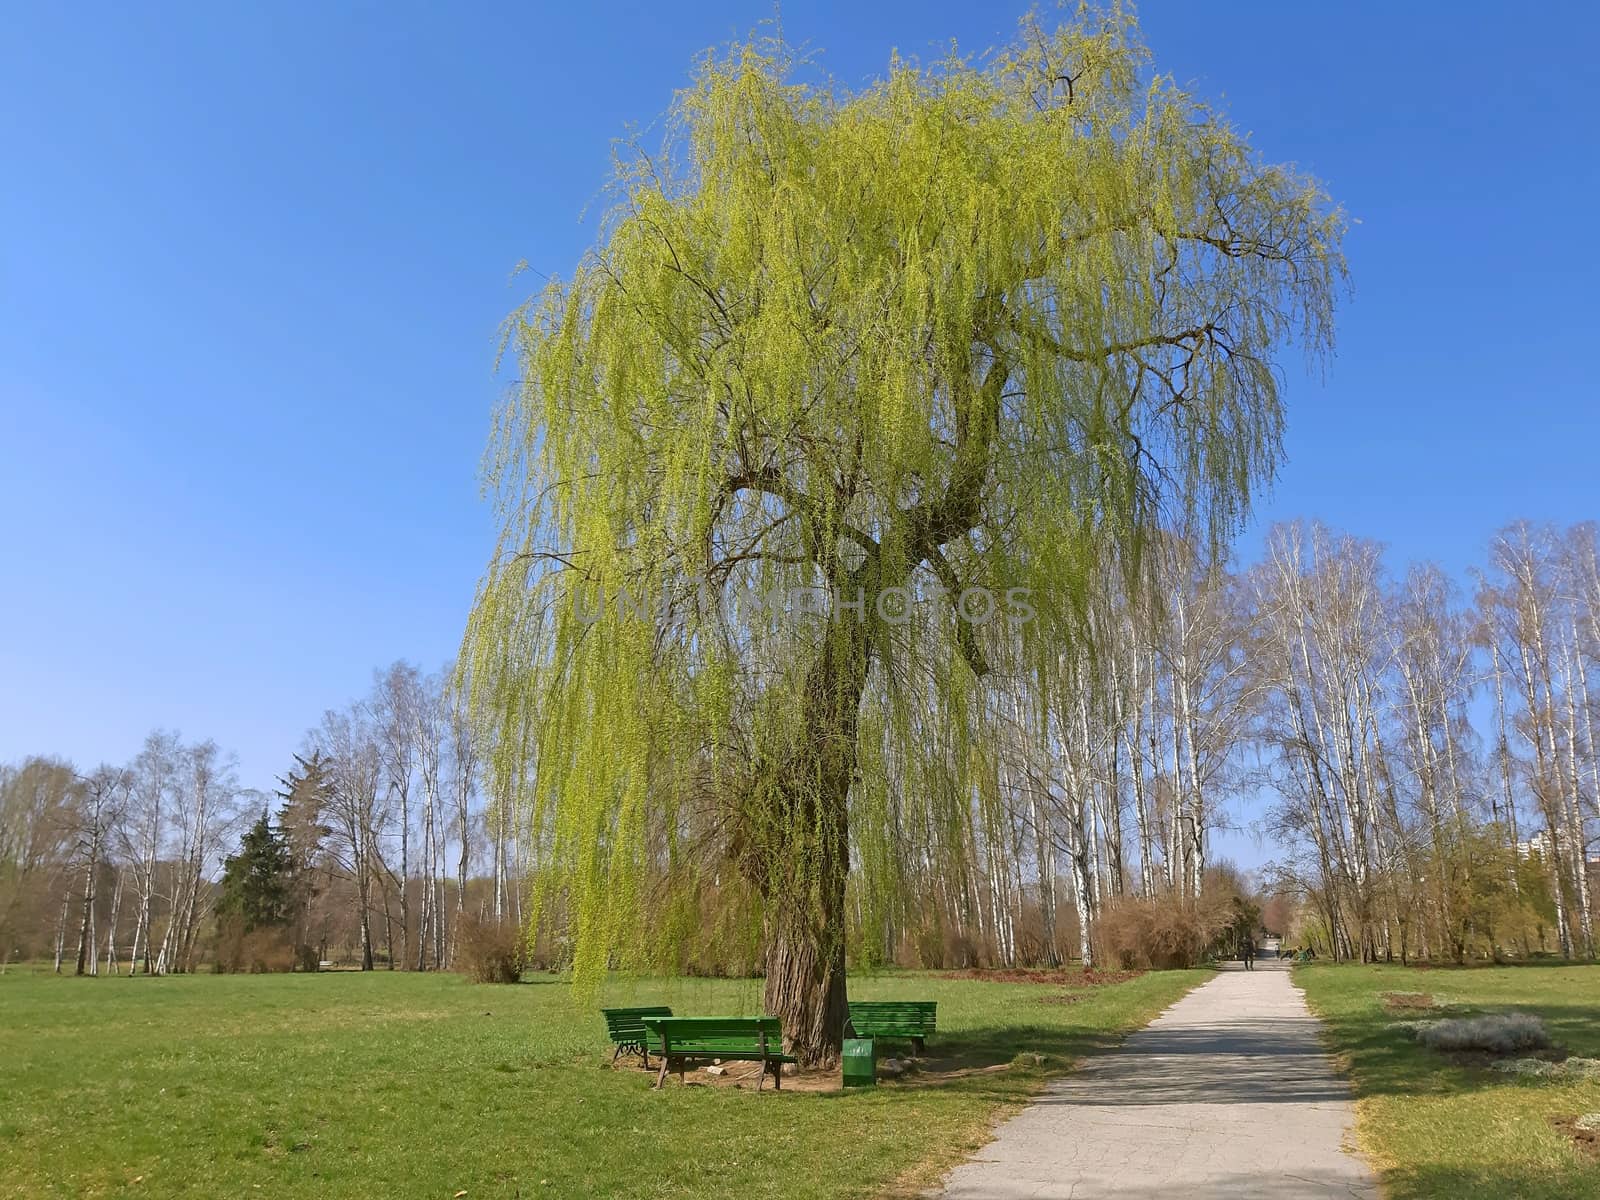 A willow tree with new fresh leaves in the spring by Mindru